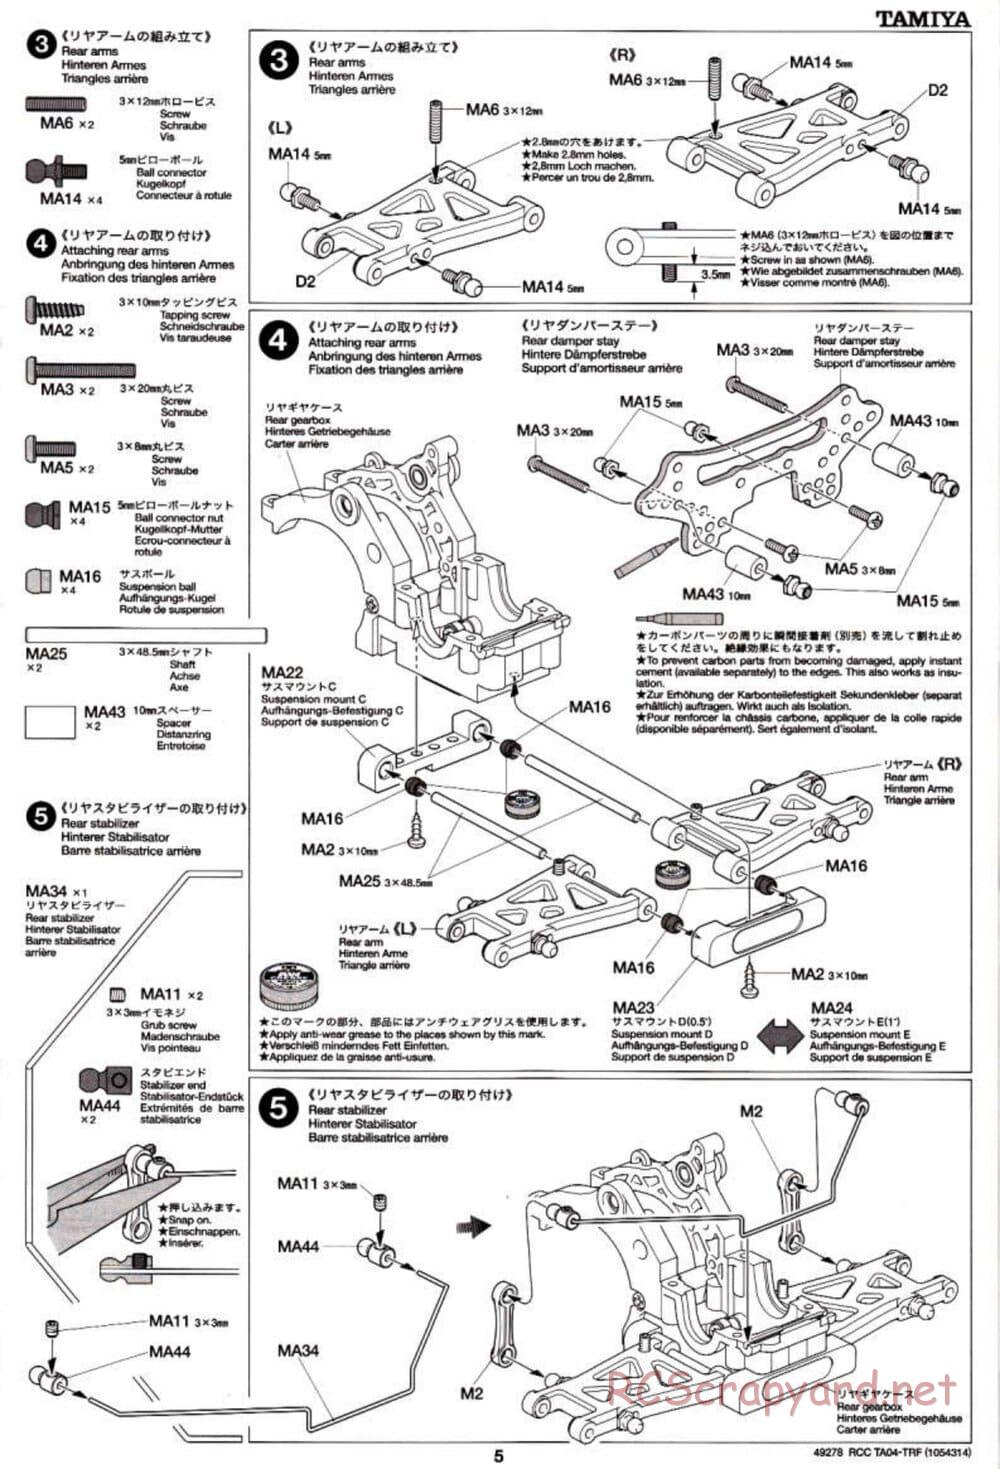 Tamiya - TA-04 TRF Special Chassis Chassis - Manual - Page 5